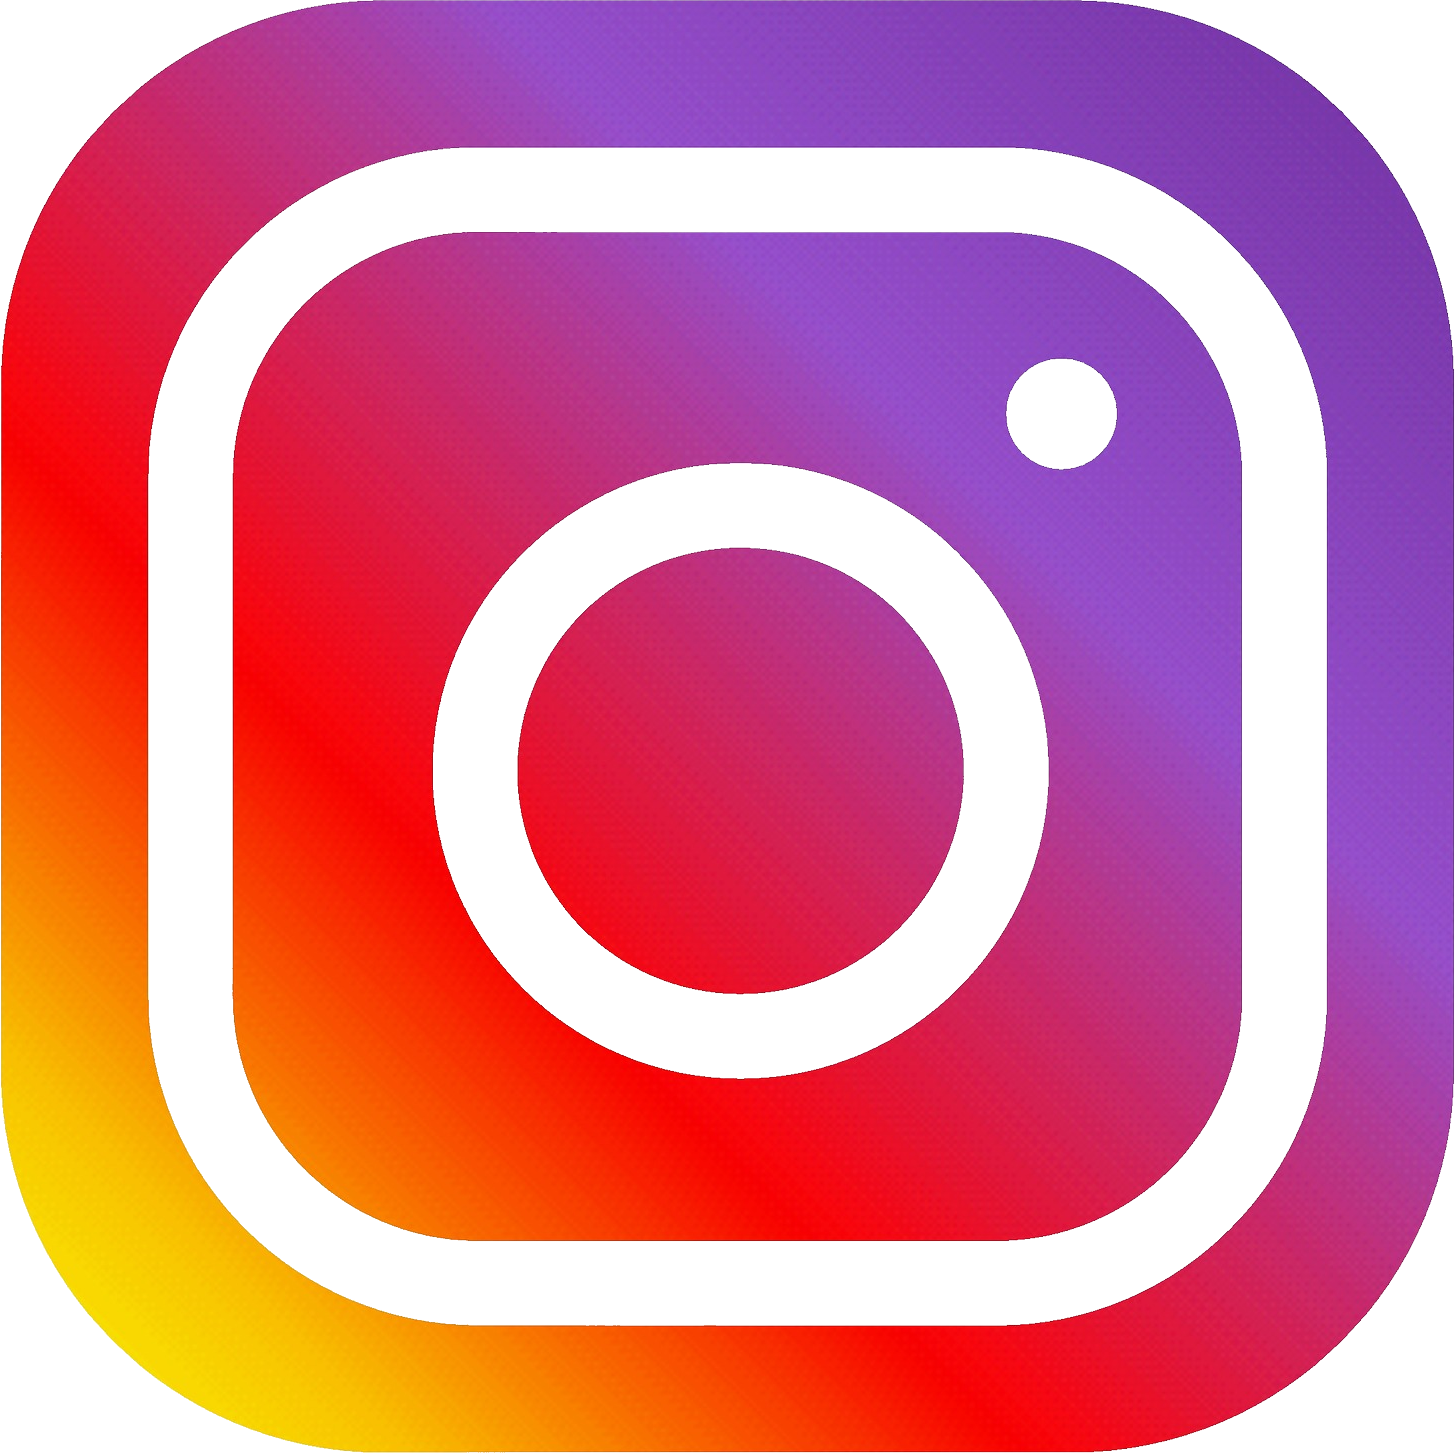 View our Instagram